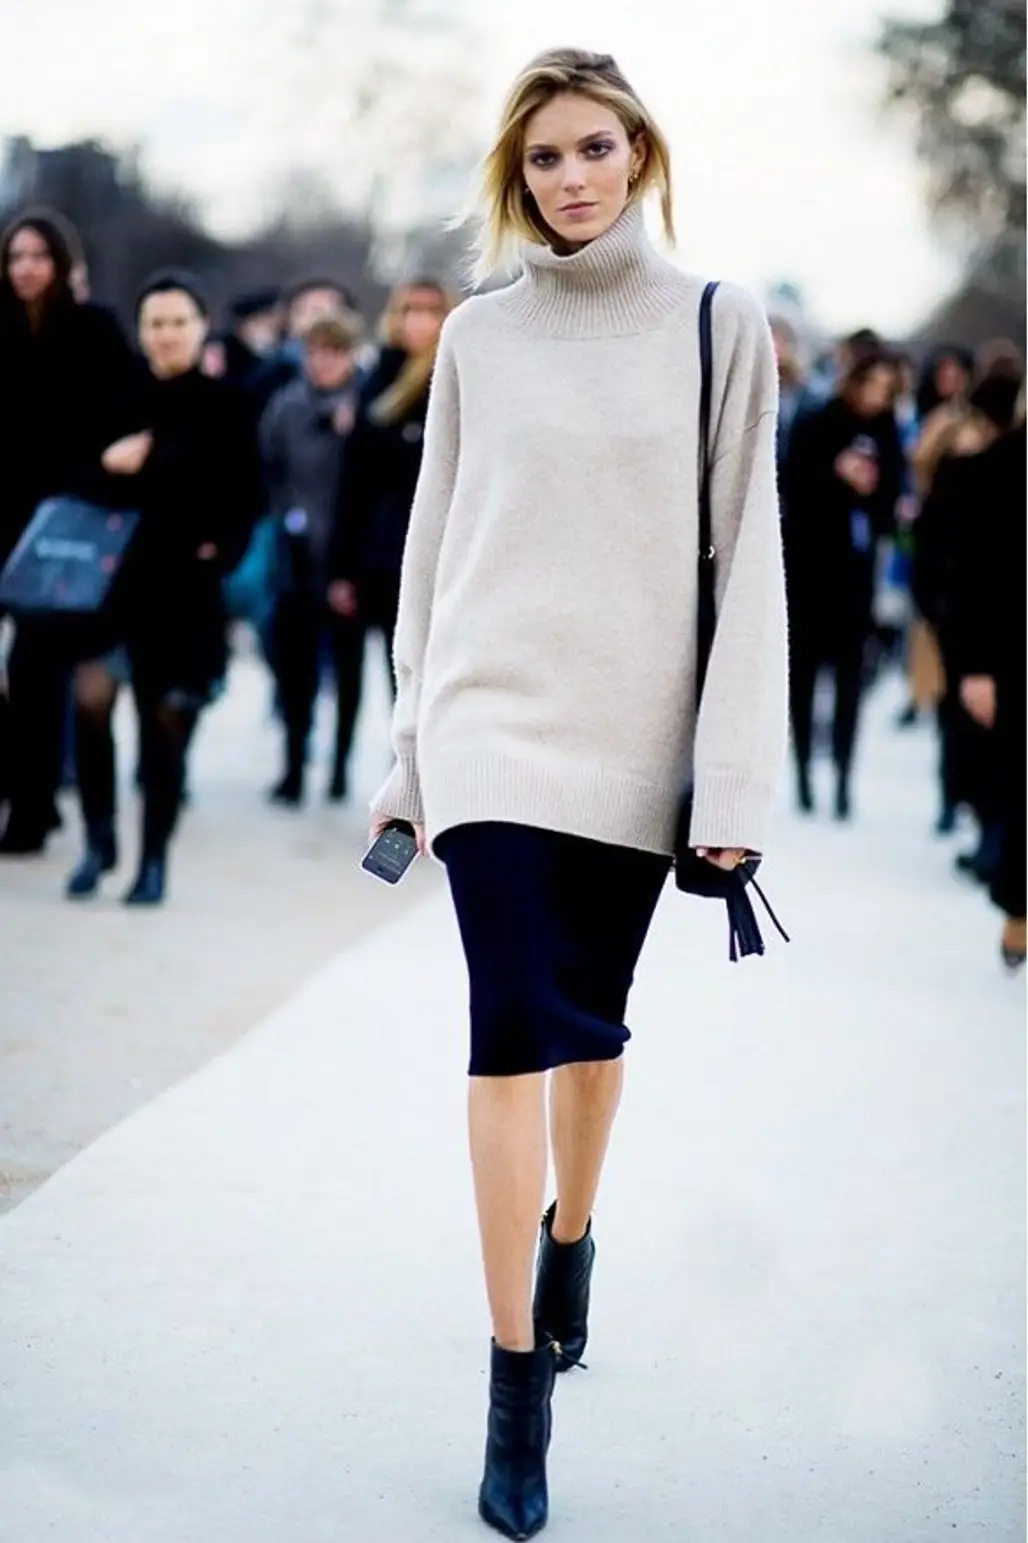 Long Sweater and Pencil Skirt